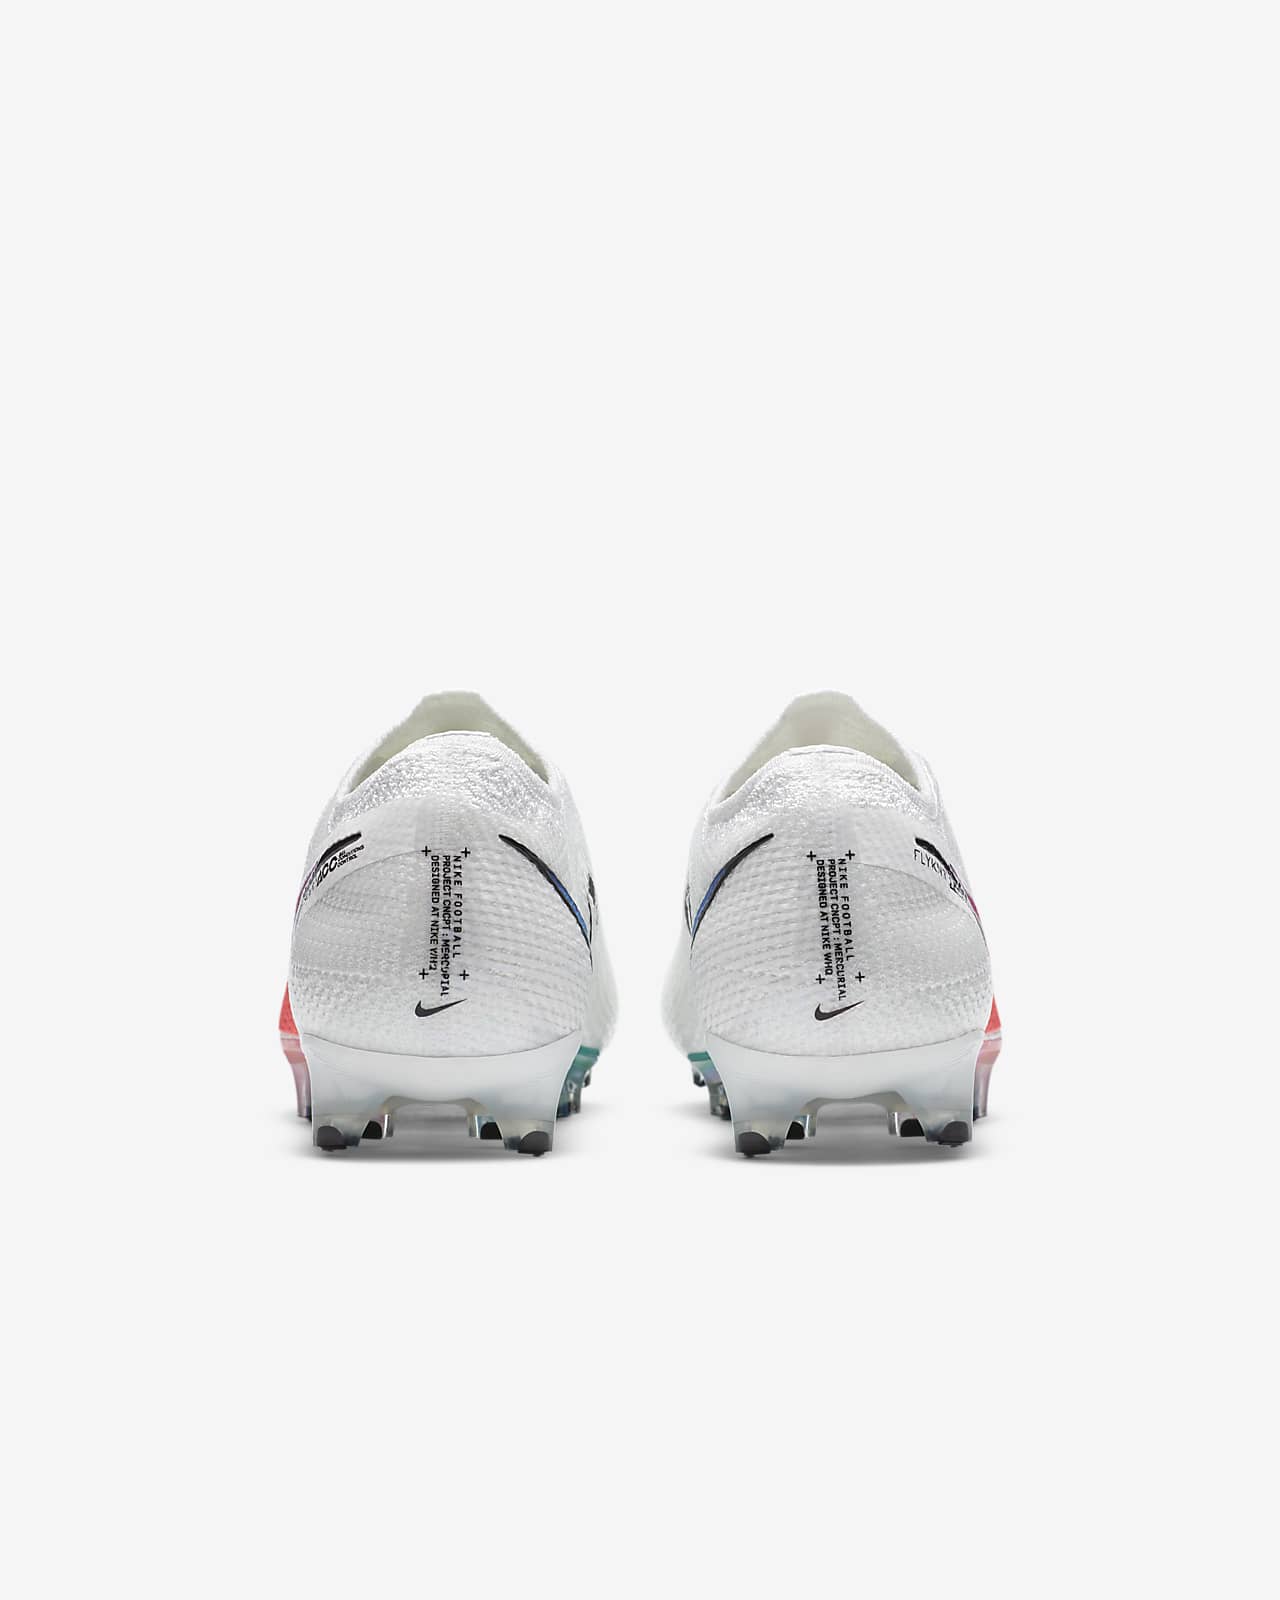 mercurial cleats white